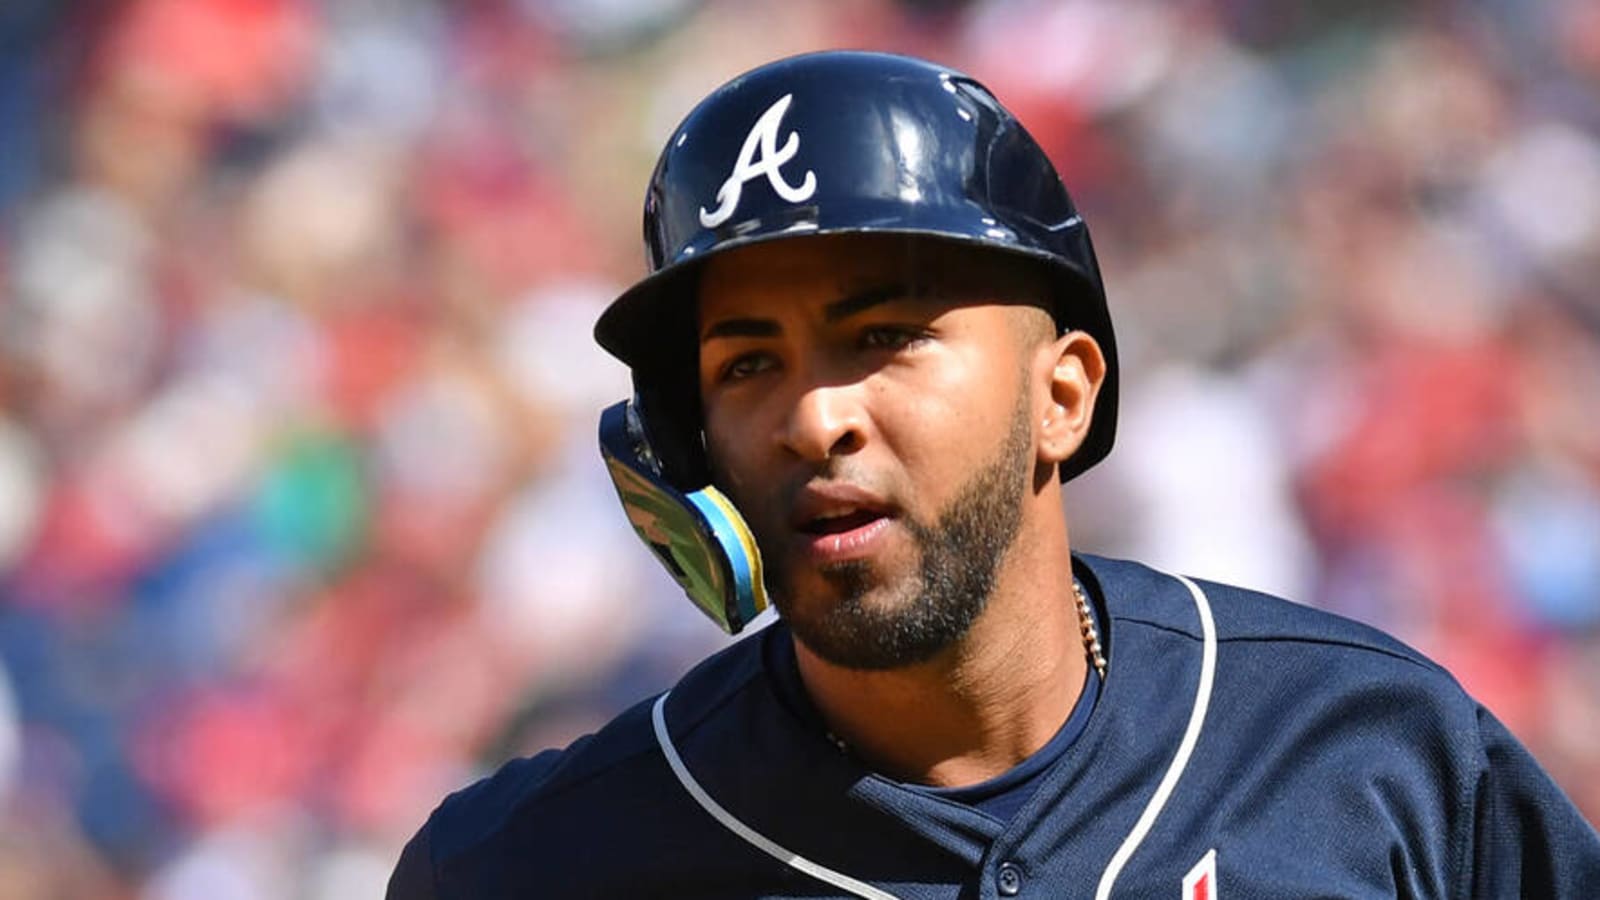 Is He Related Eddie Rosario? - Breaking News in USA Today